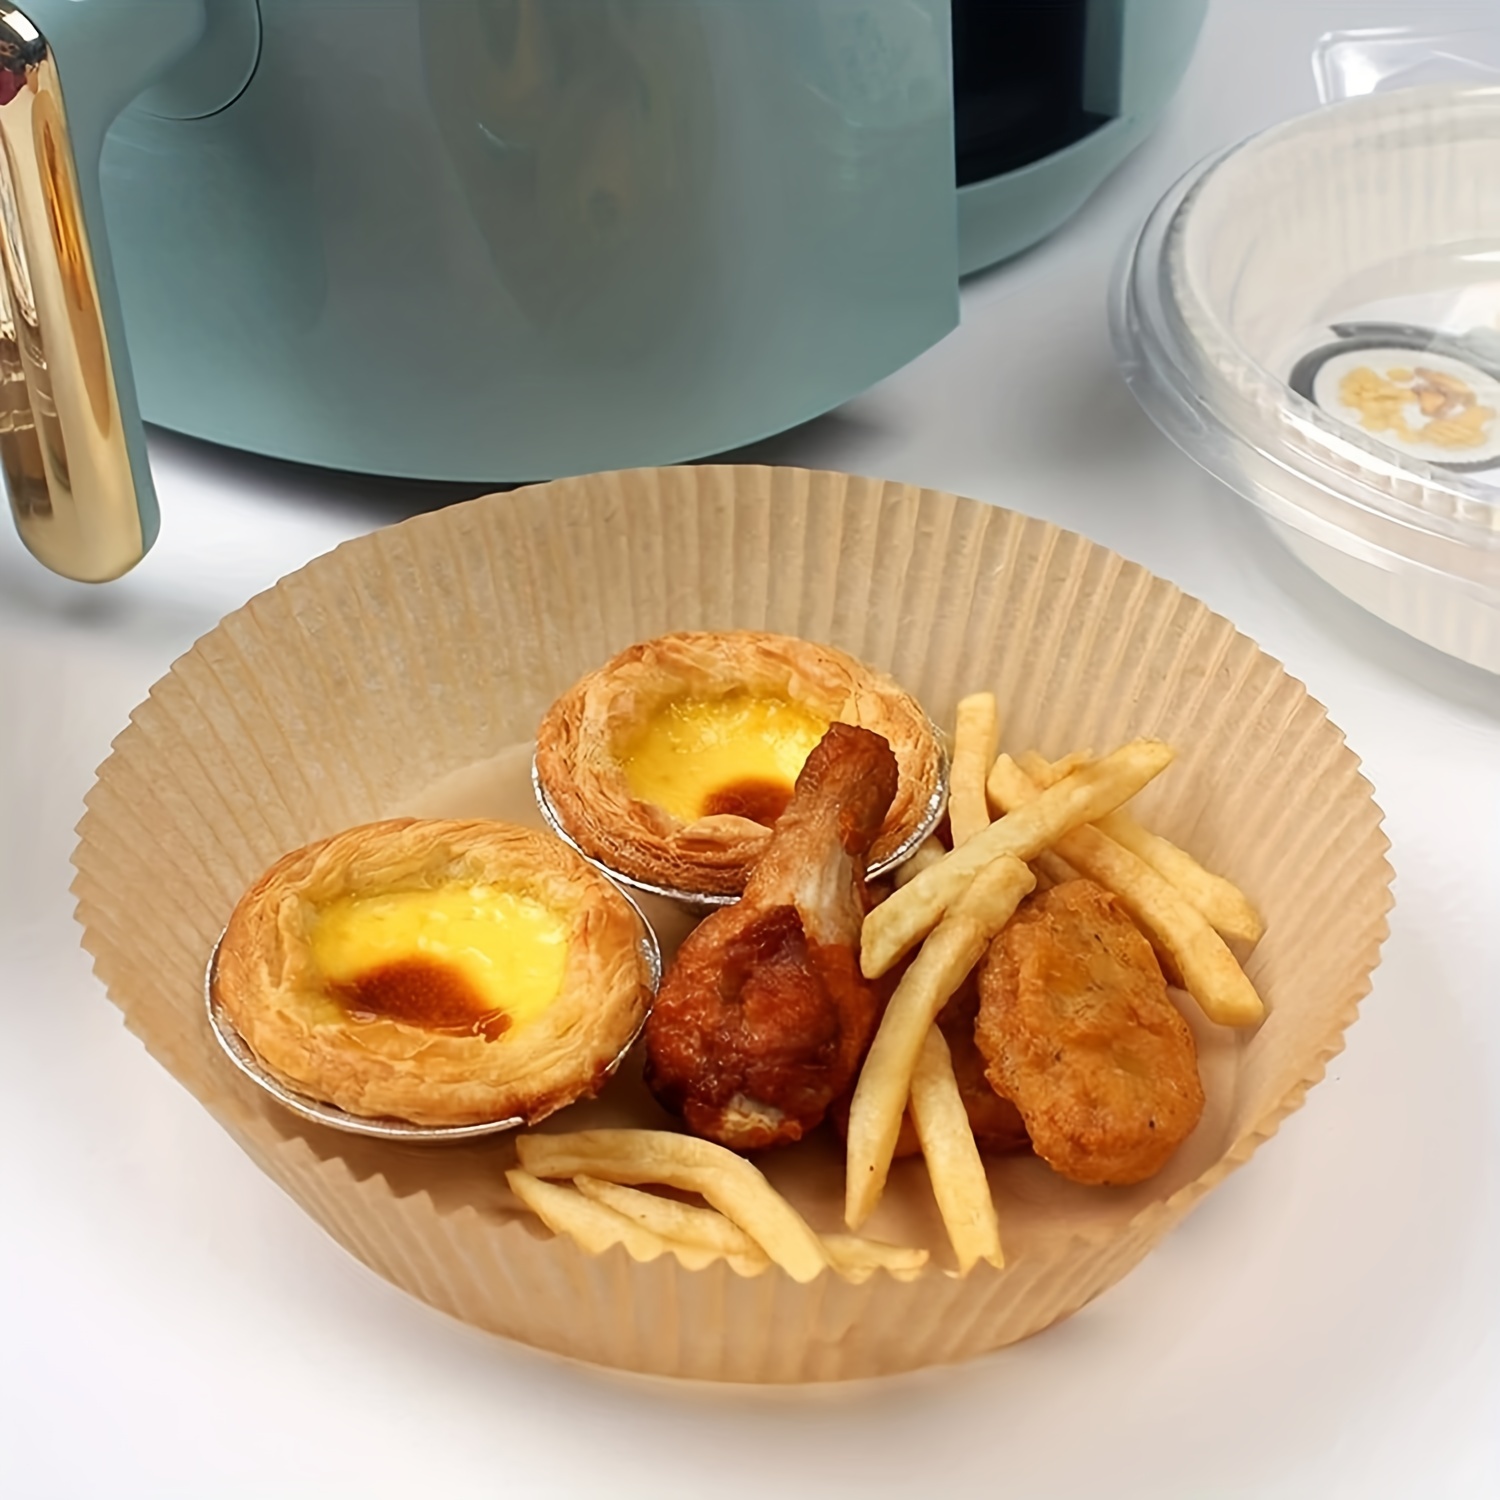 Air Fryer Disposable Paper Liner, Round Airfryer Parchment Sheets Liners  For Baking, Non-stick Oil-proof Filter